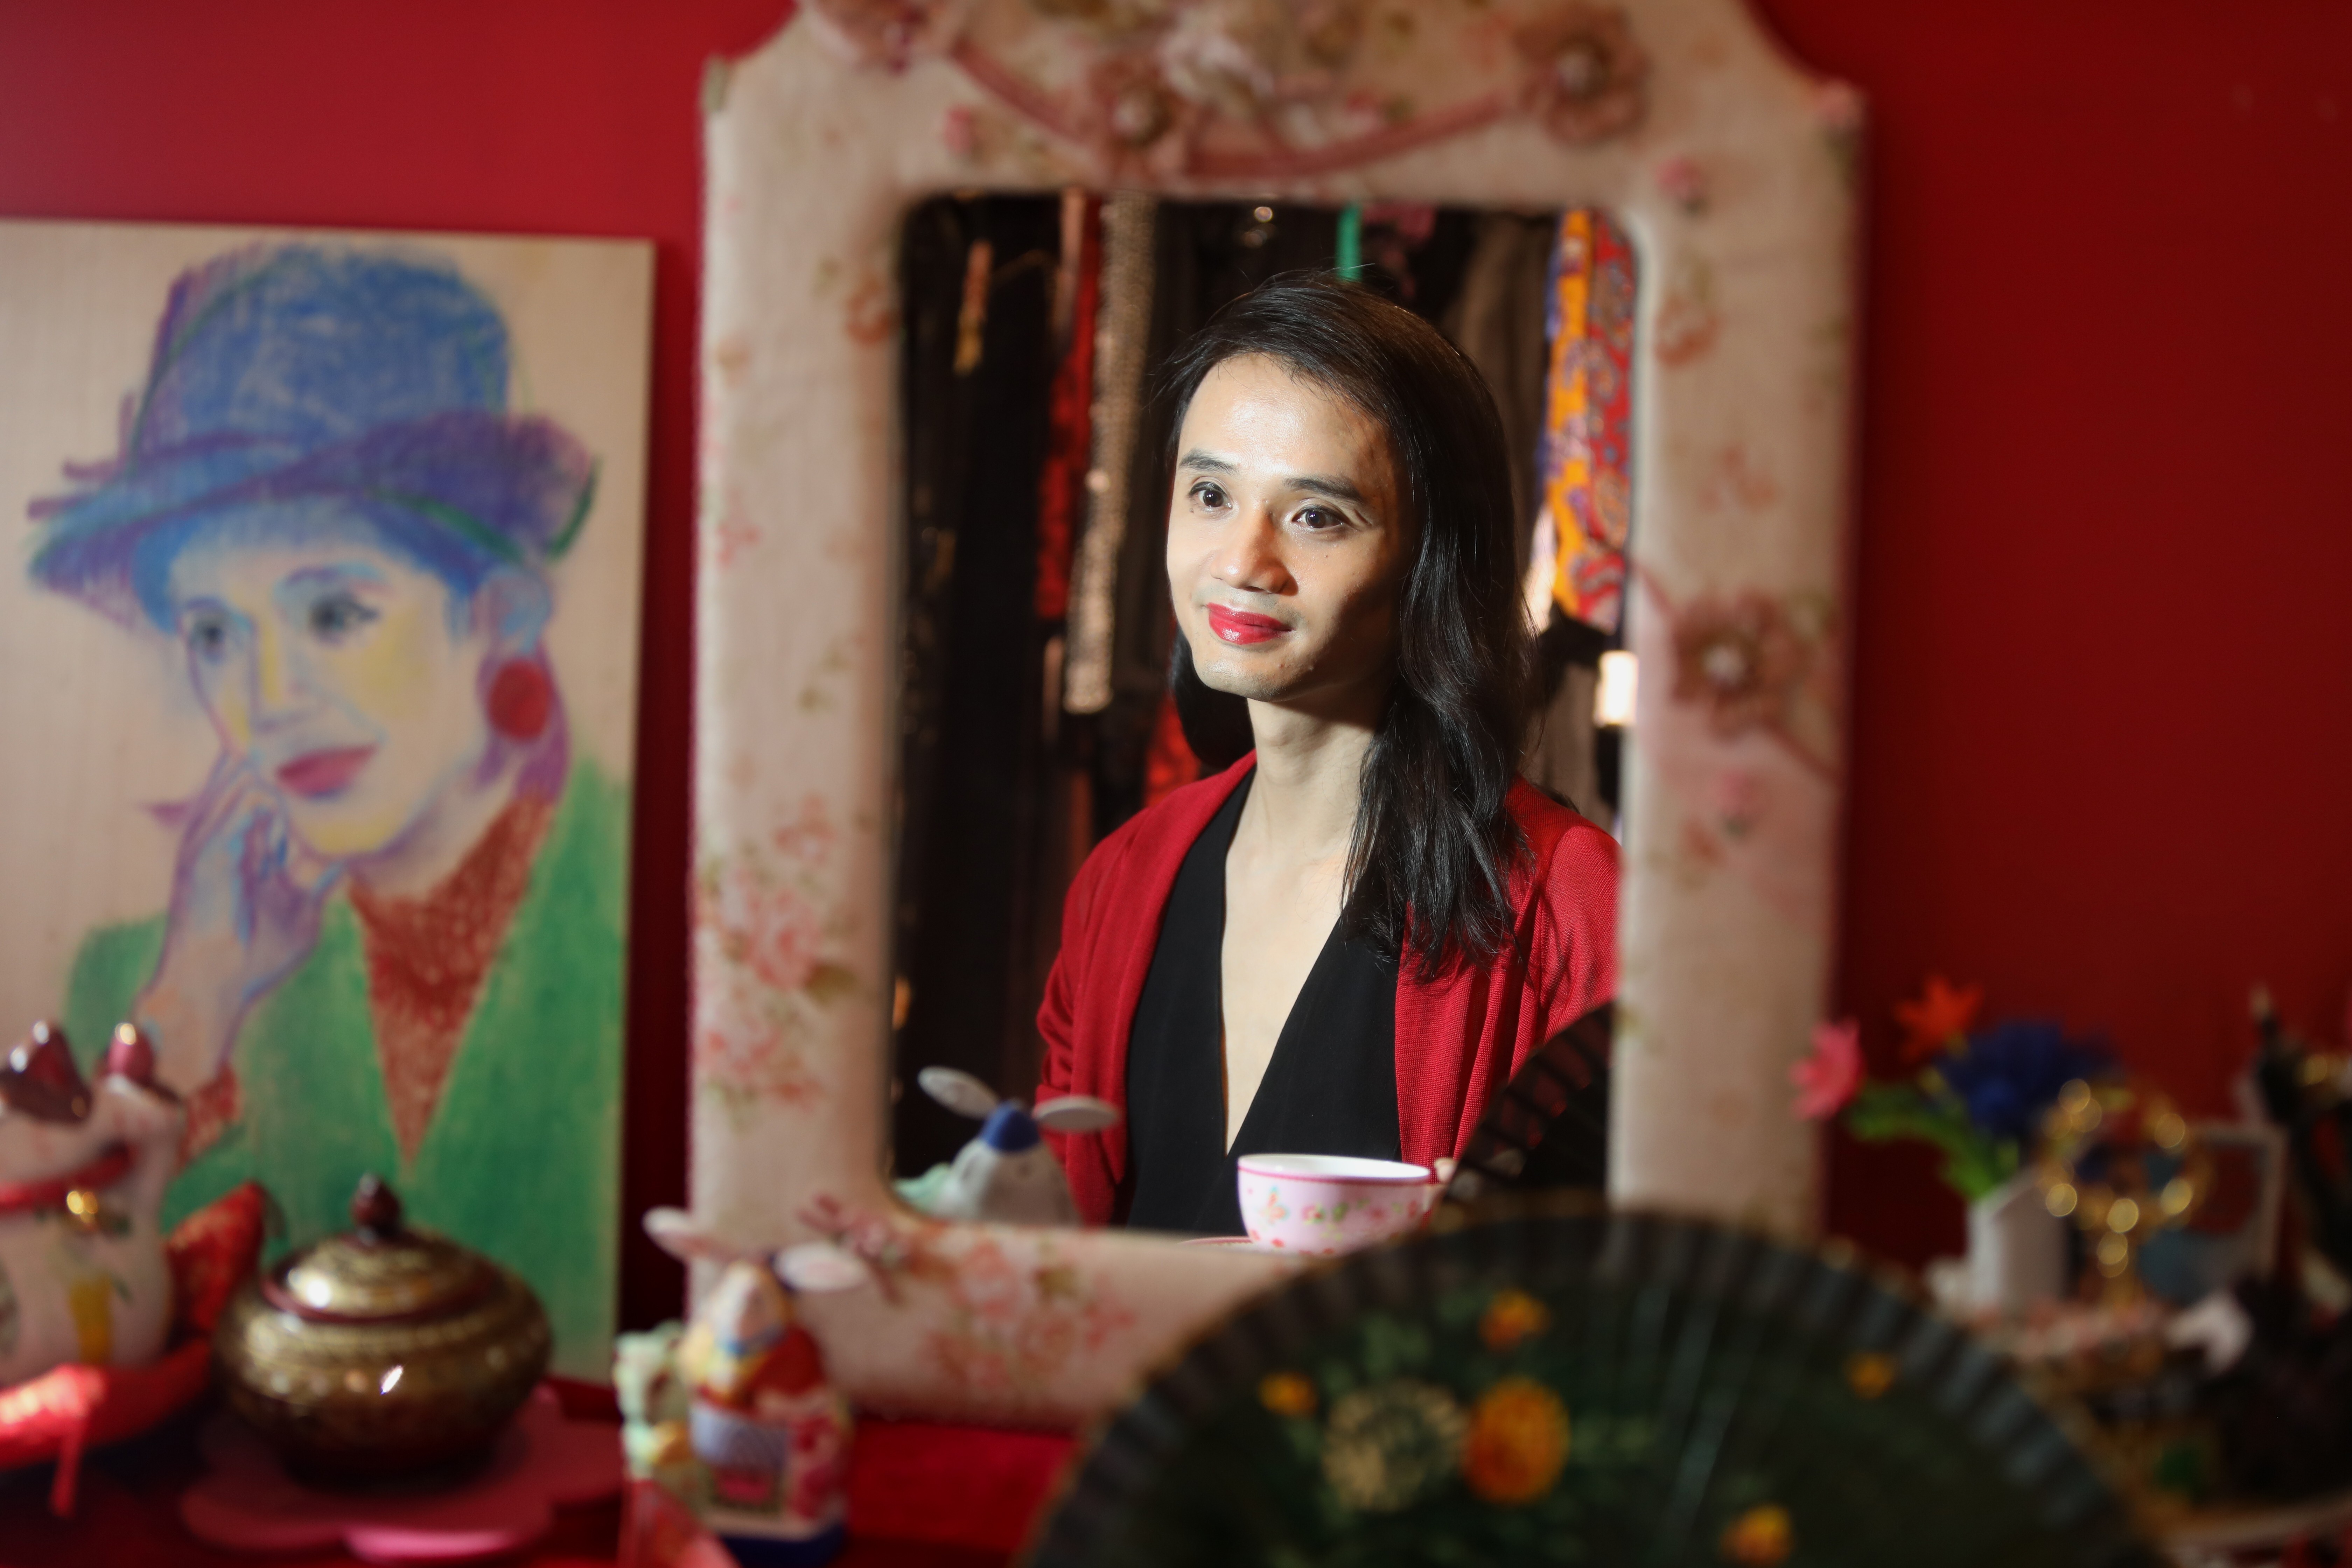 Chinese transgender activist Chao Xiaomi, a gender non-conforming individual, at her vintage clothing store in Beijing. Photo: Simon Song